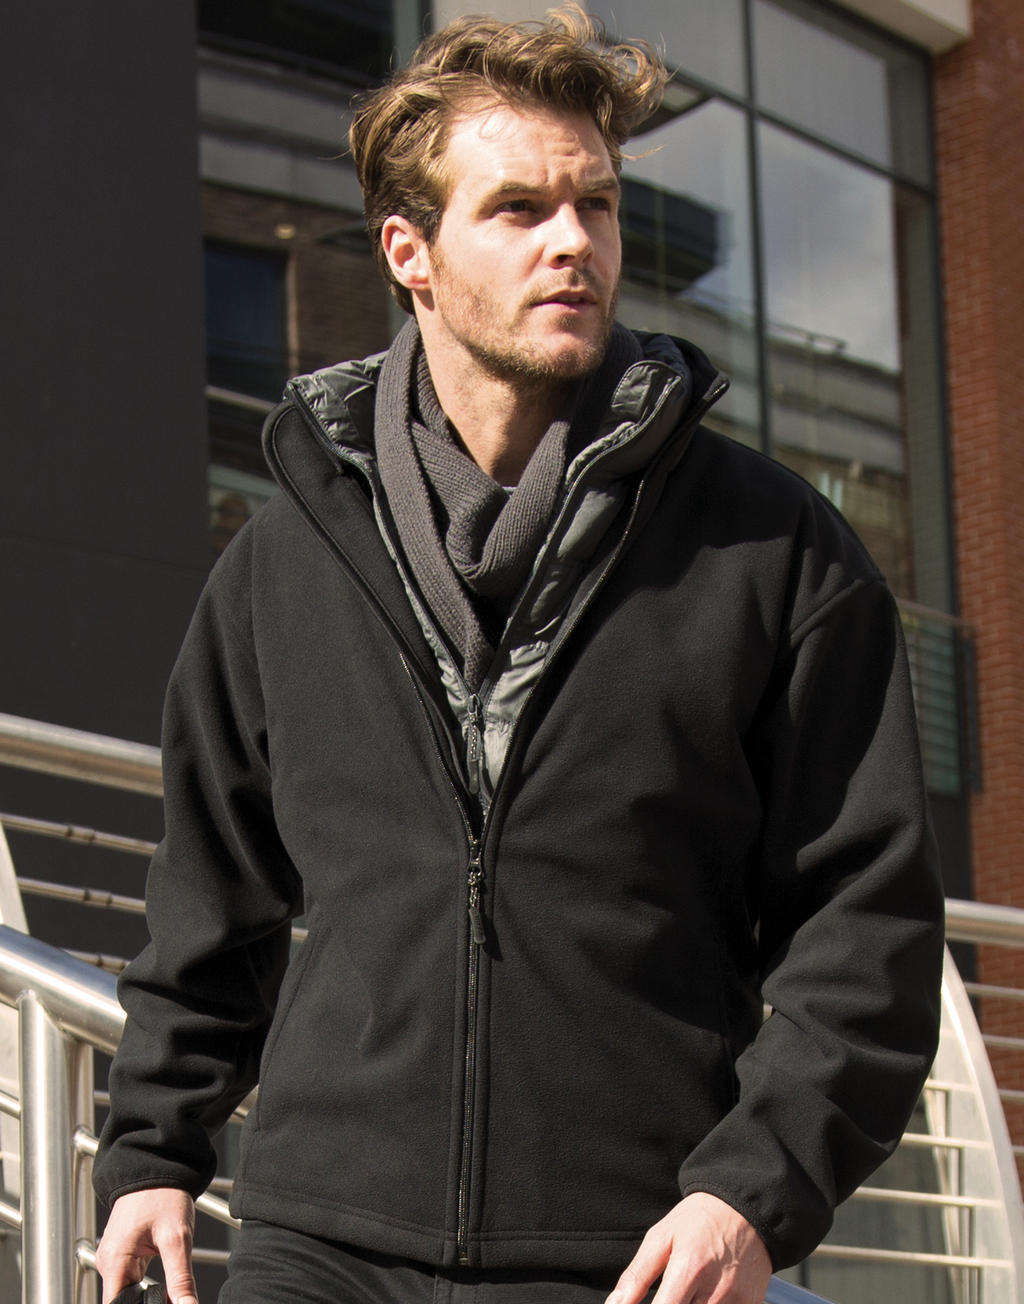  Climate Stopper Water Resistant Fleece in Farbe Black